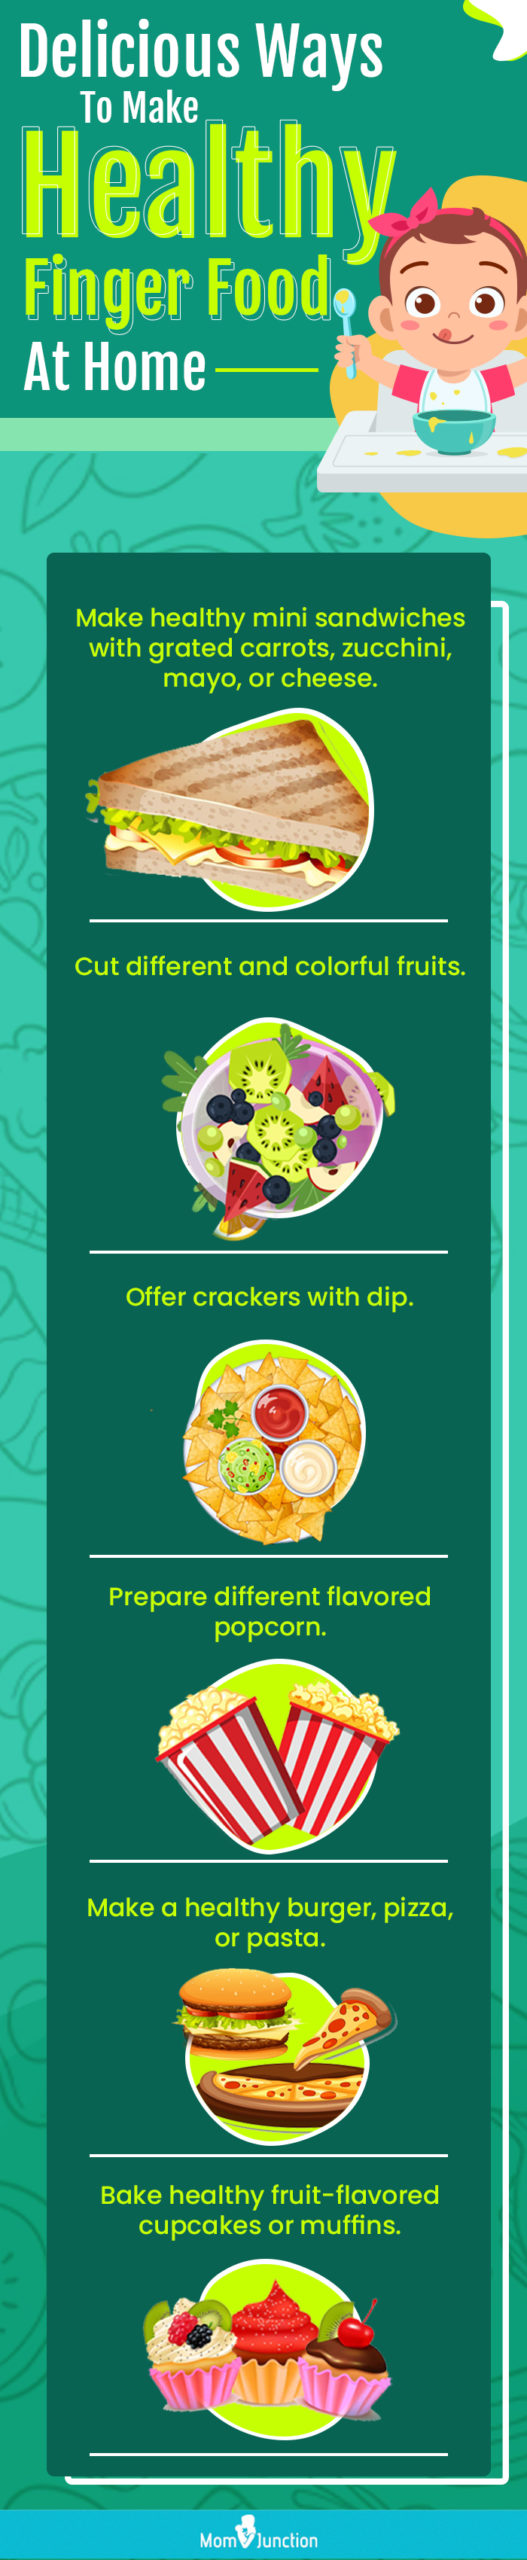 delicious ways to make healthy finger foods at home (infographic)